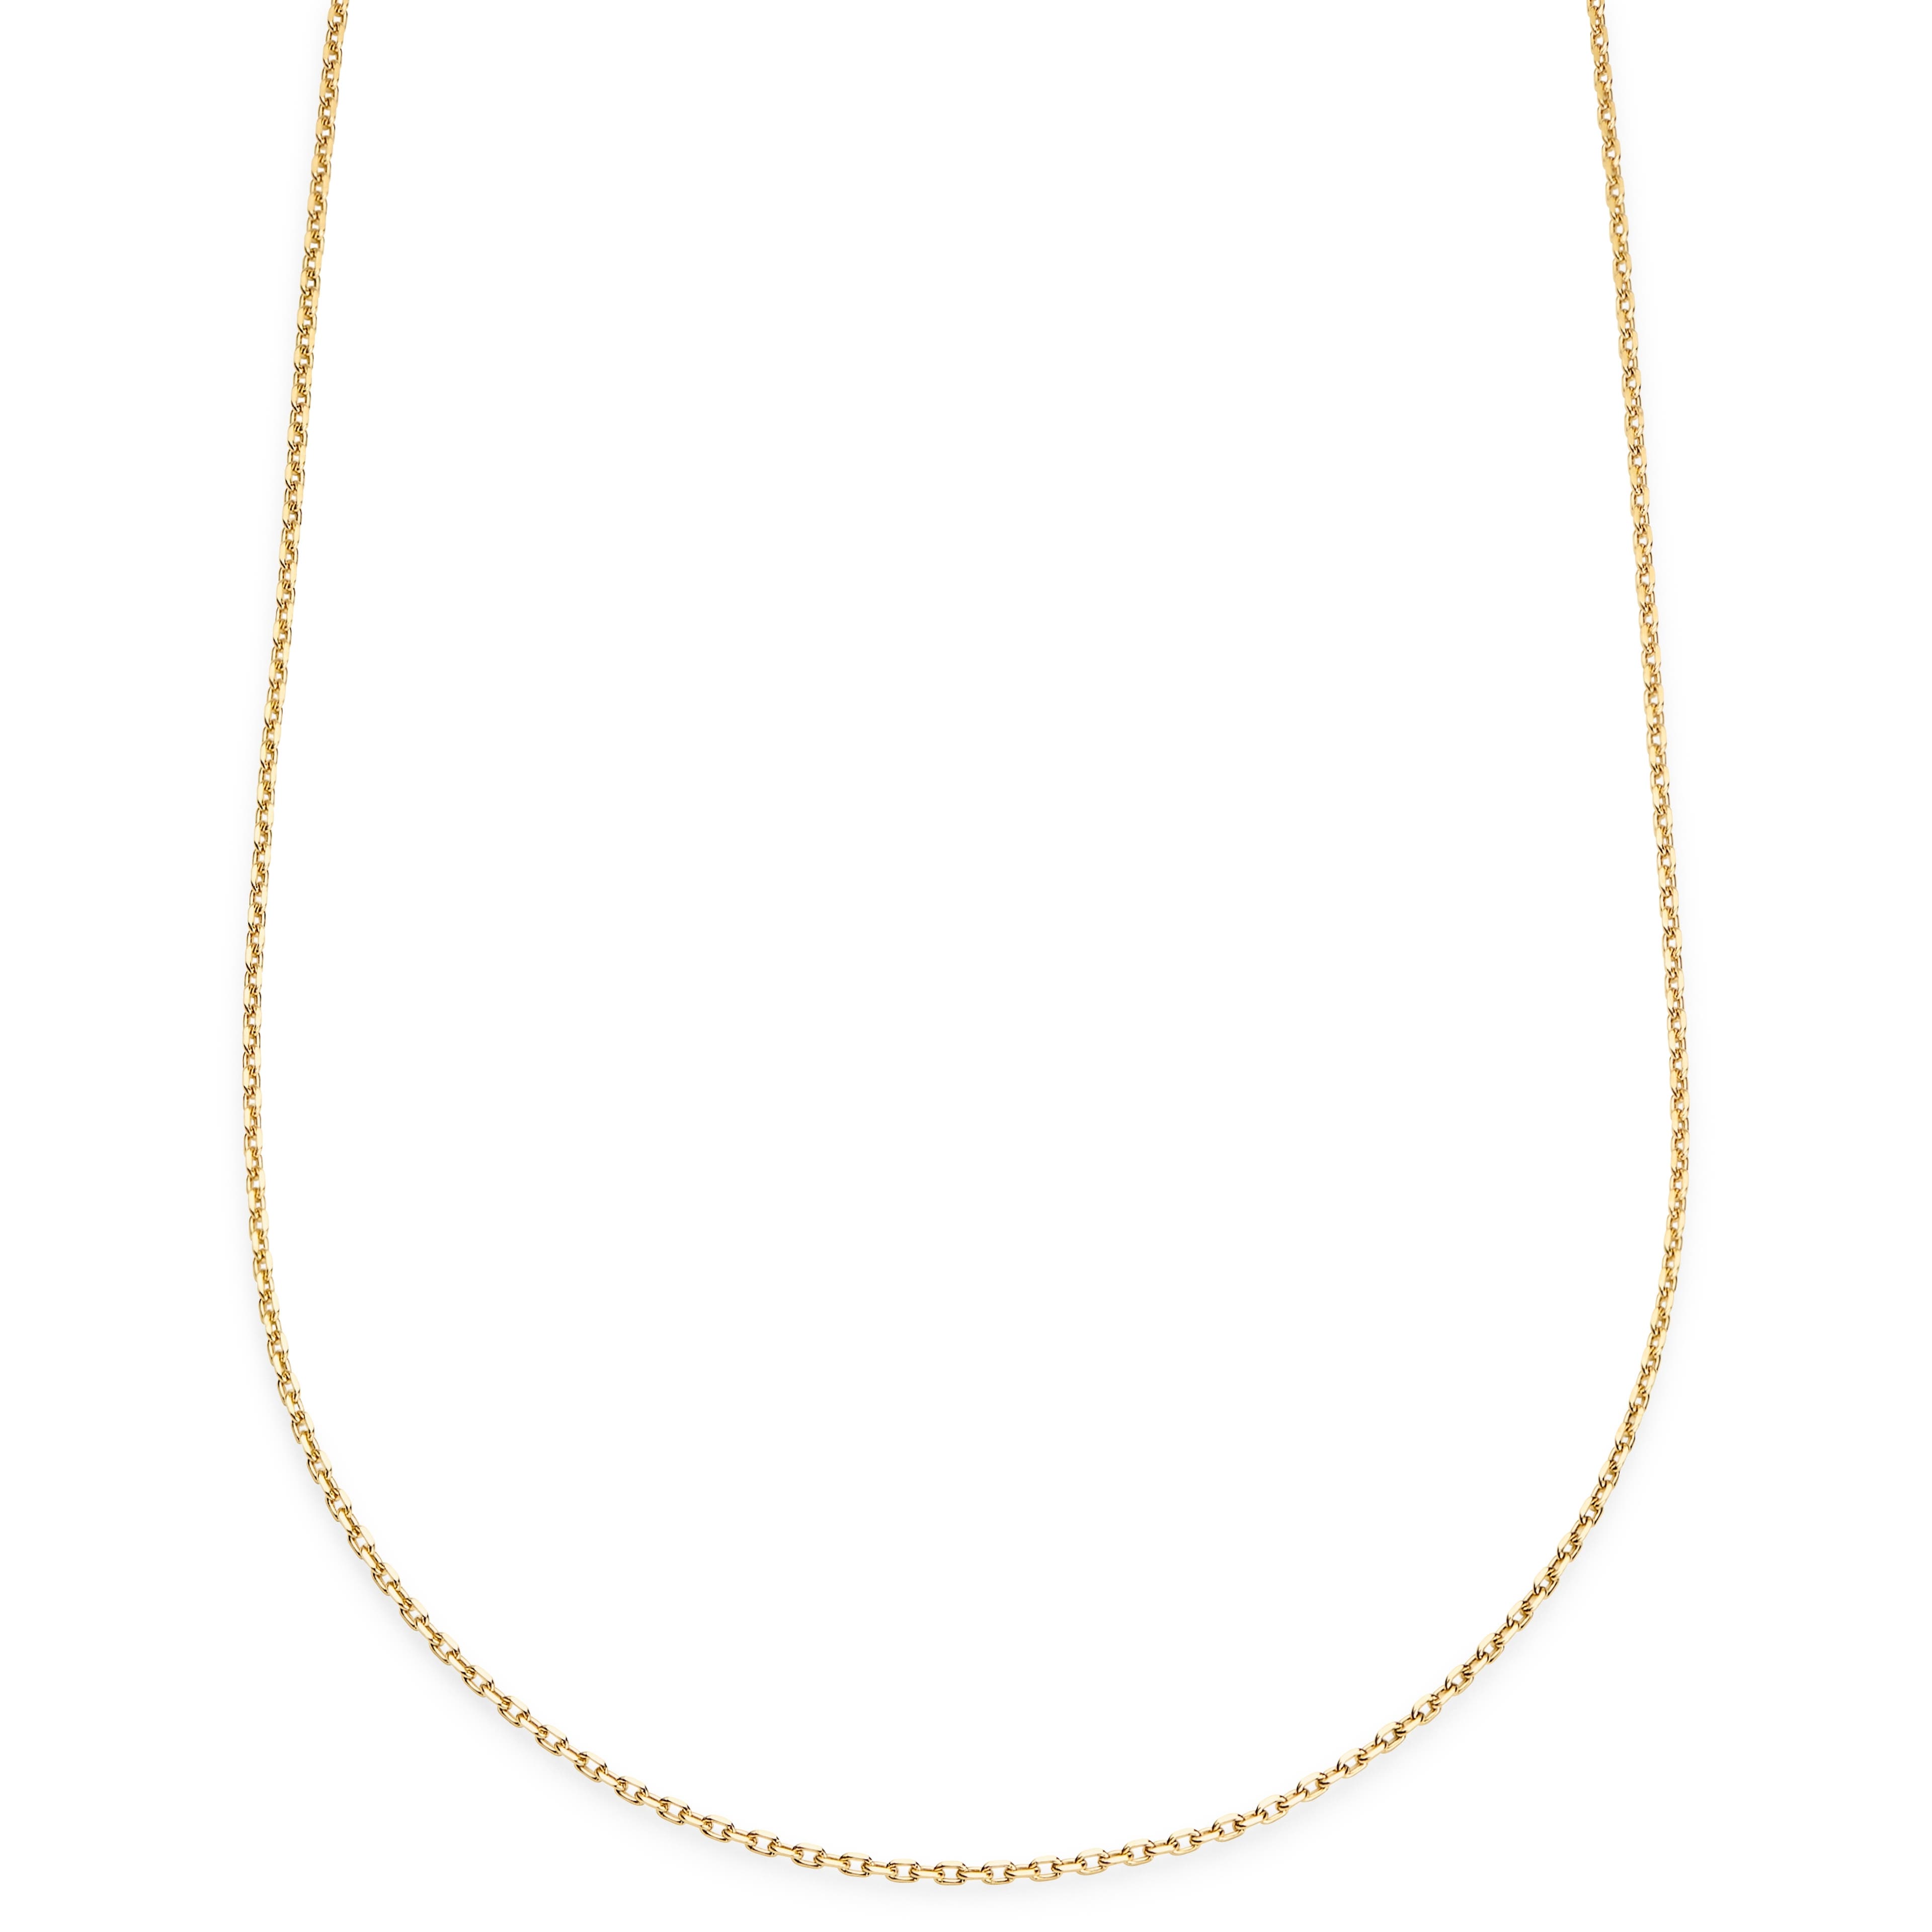 Essentials | 2 mm Gold-Tone Cable Chain Necklace